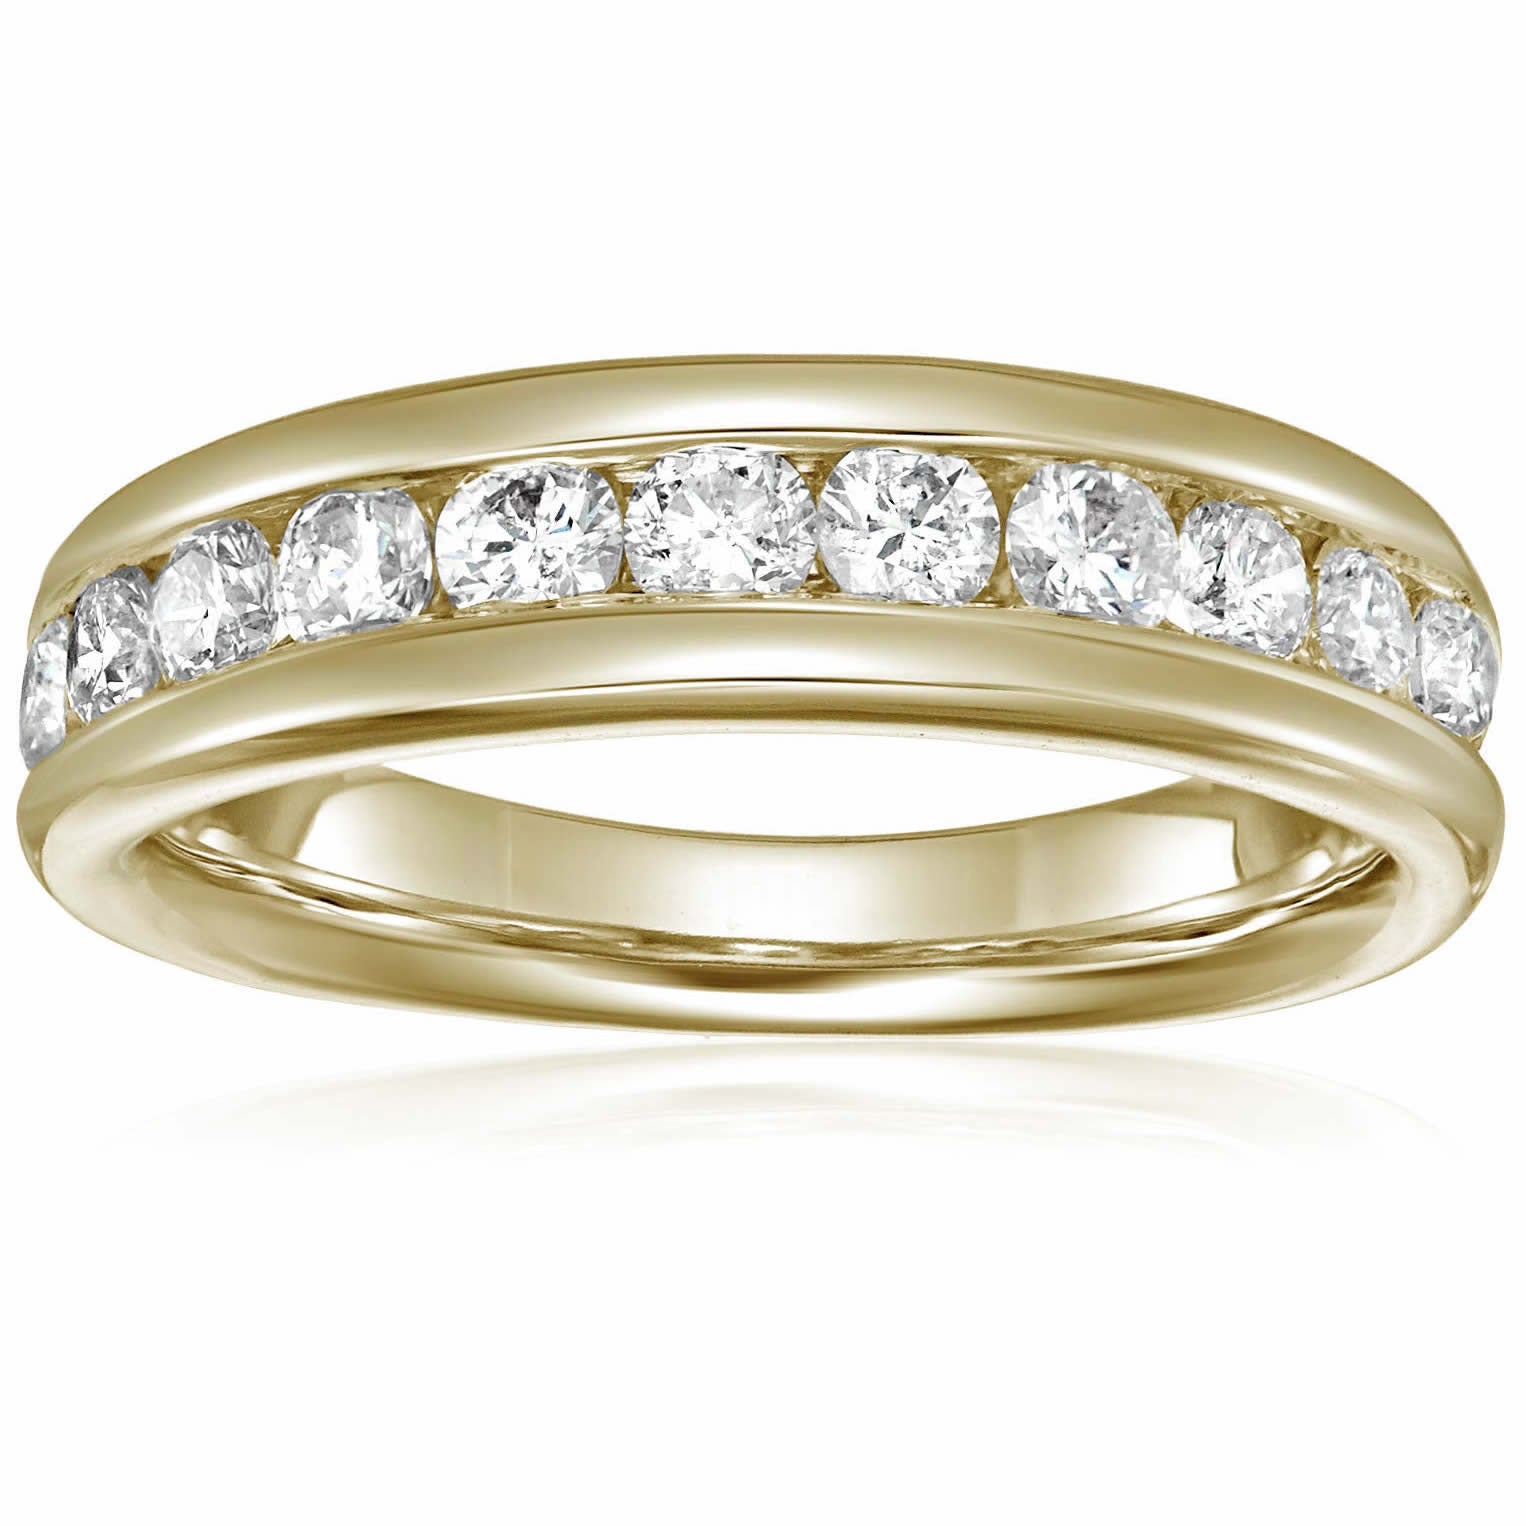 1/2 cttw Diamond Wedding Band for Women, Comfort Fit Diamond Wedding Band in 14K Yellow Gold Channel Set, Size 4.5-10